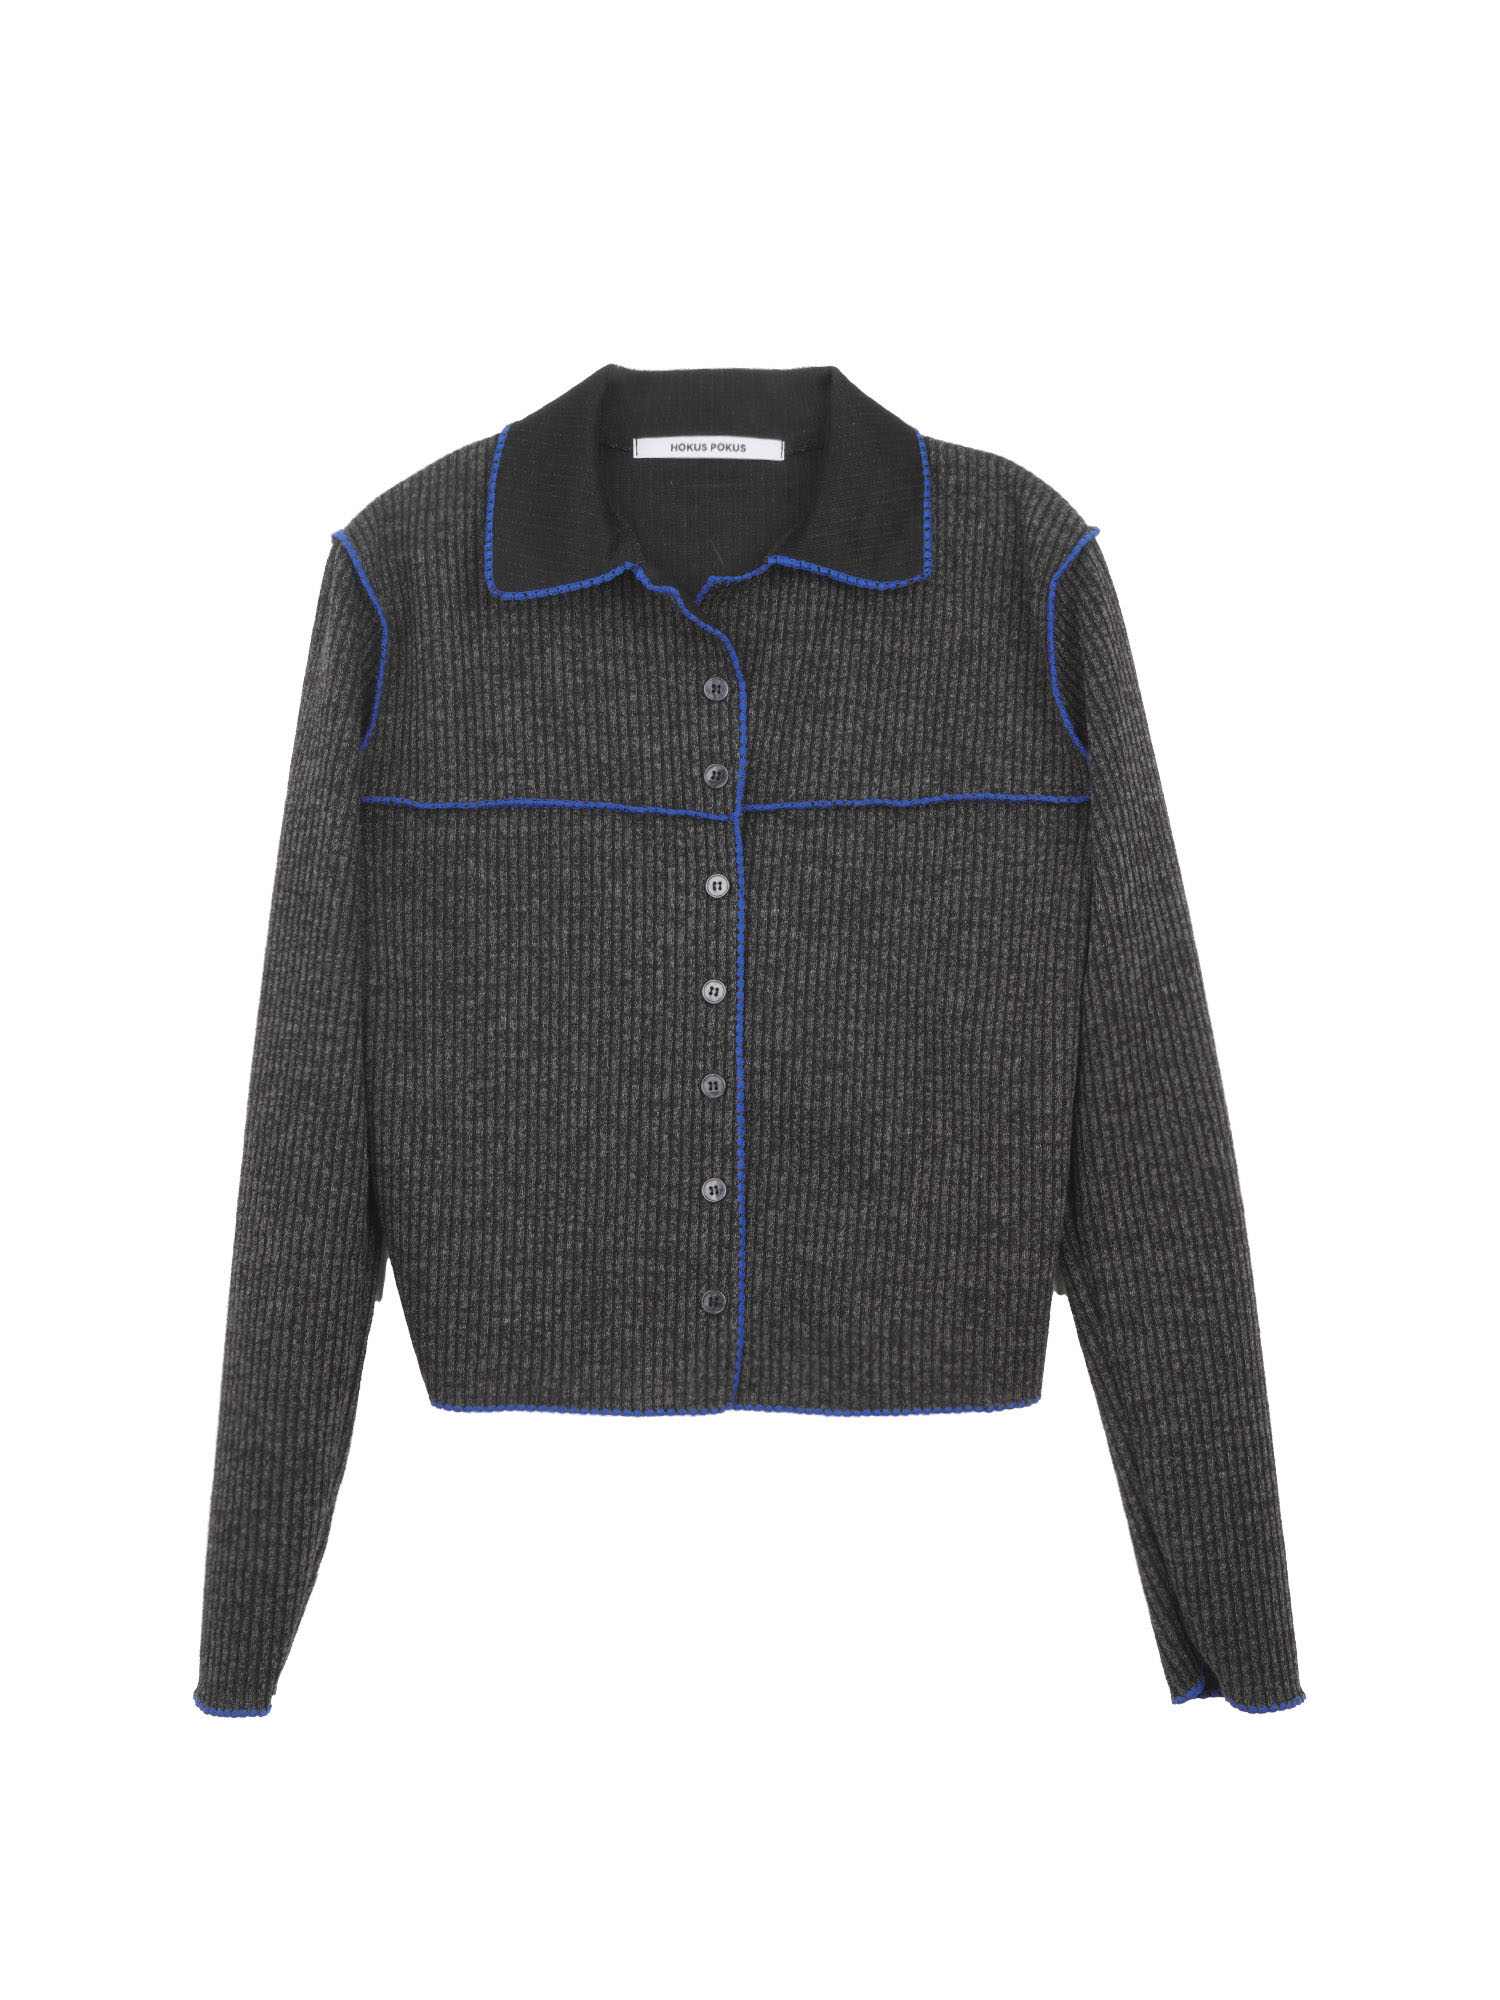 Pathwork Embroidery Ribbed Cardigan - Charcoal